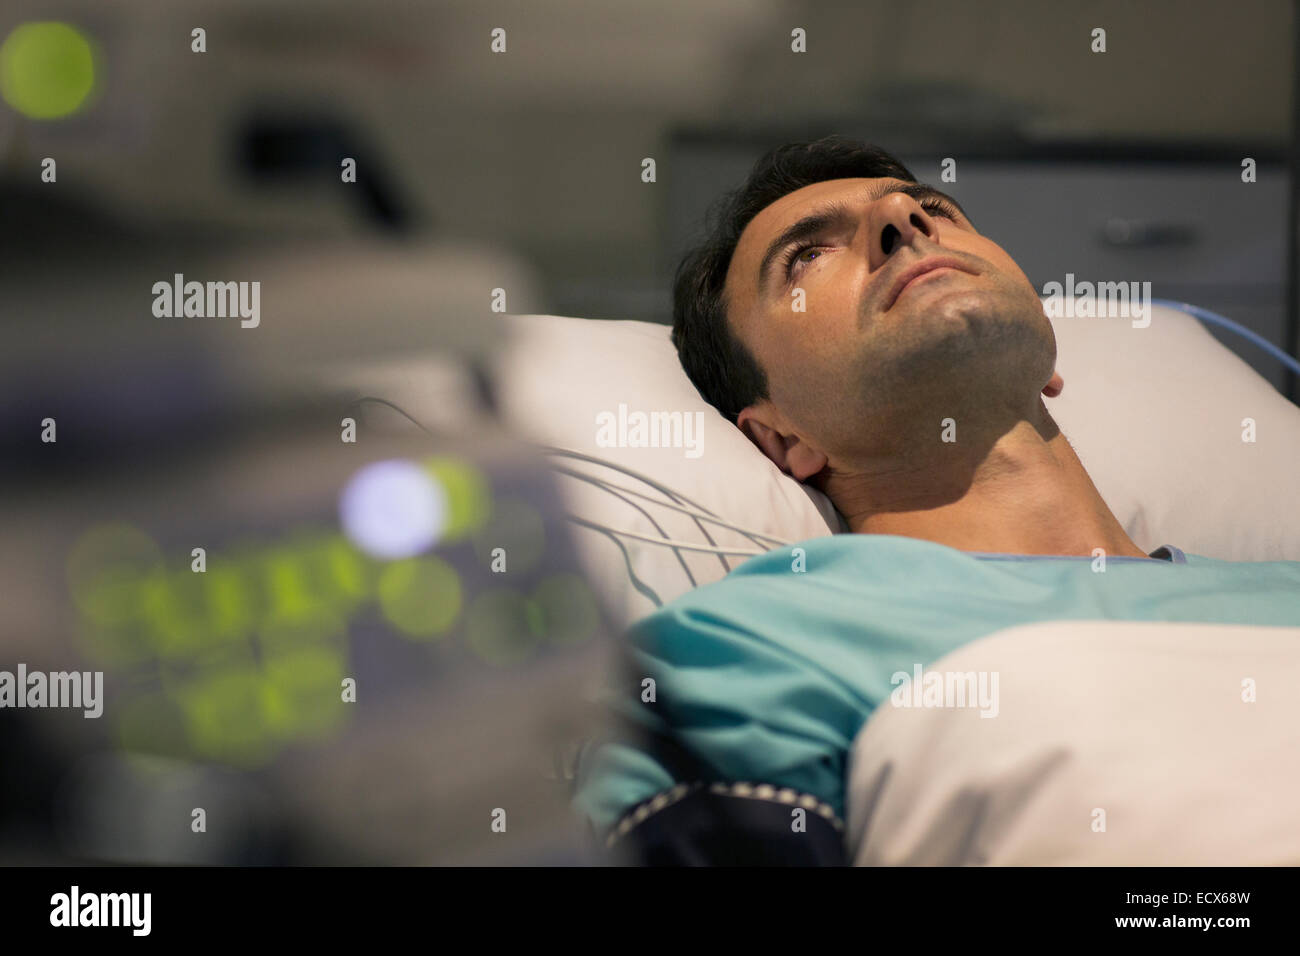 Male patient lying in hospital bed Stock Photo